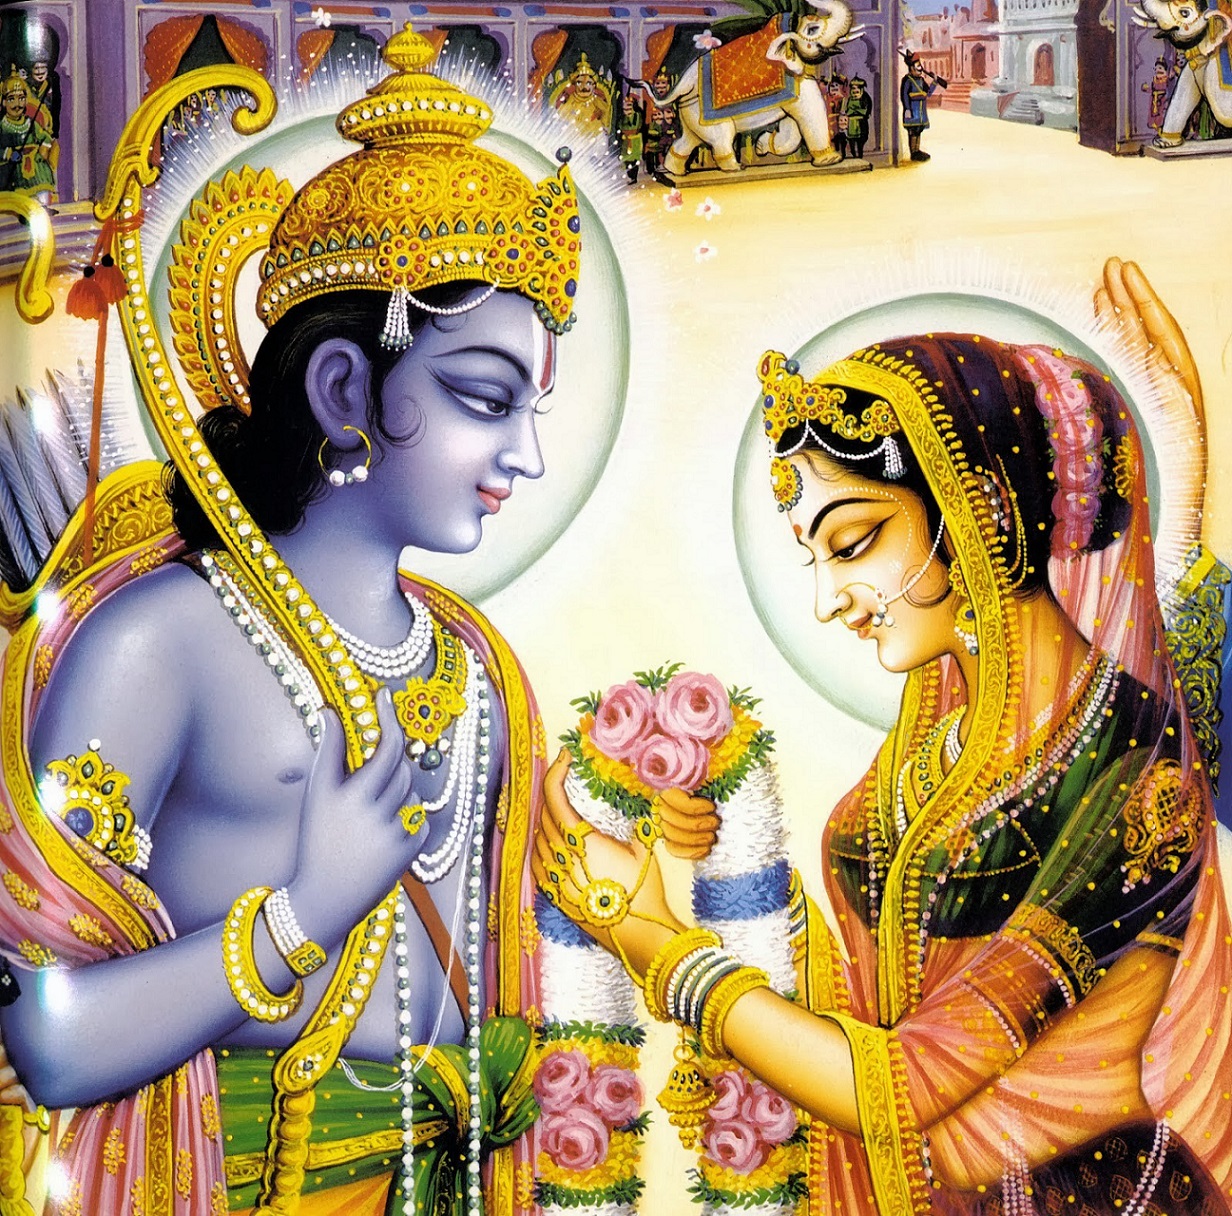 How many gunas matched for ram and sita?